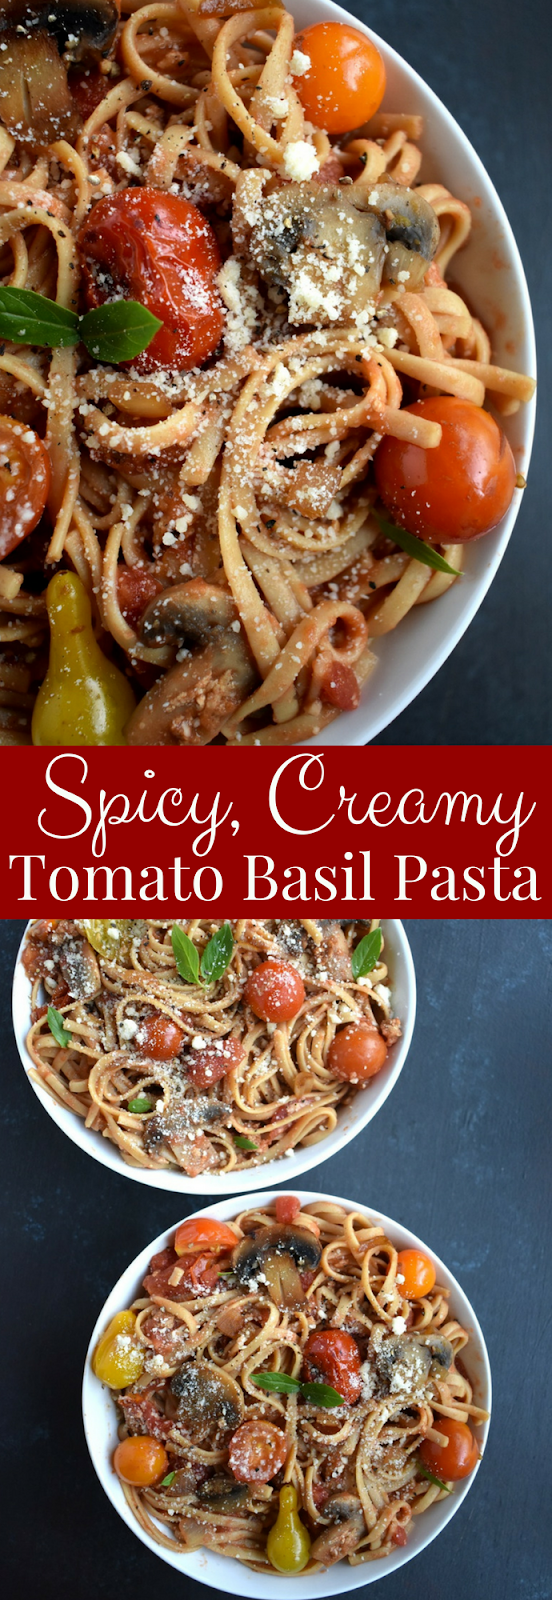 Spicy Creamy Tomato Basil Pasta features a creamy, spicy tomato basil sauce made with Greek yogurt, parmesan and fresh cherry tomatoes and sauteed mushrooms! www.nutritionistreviews.com